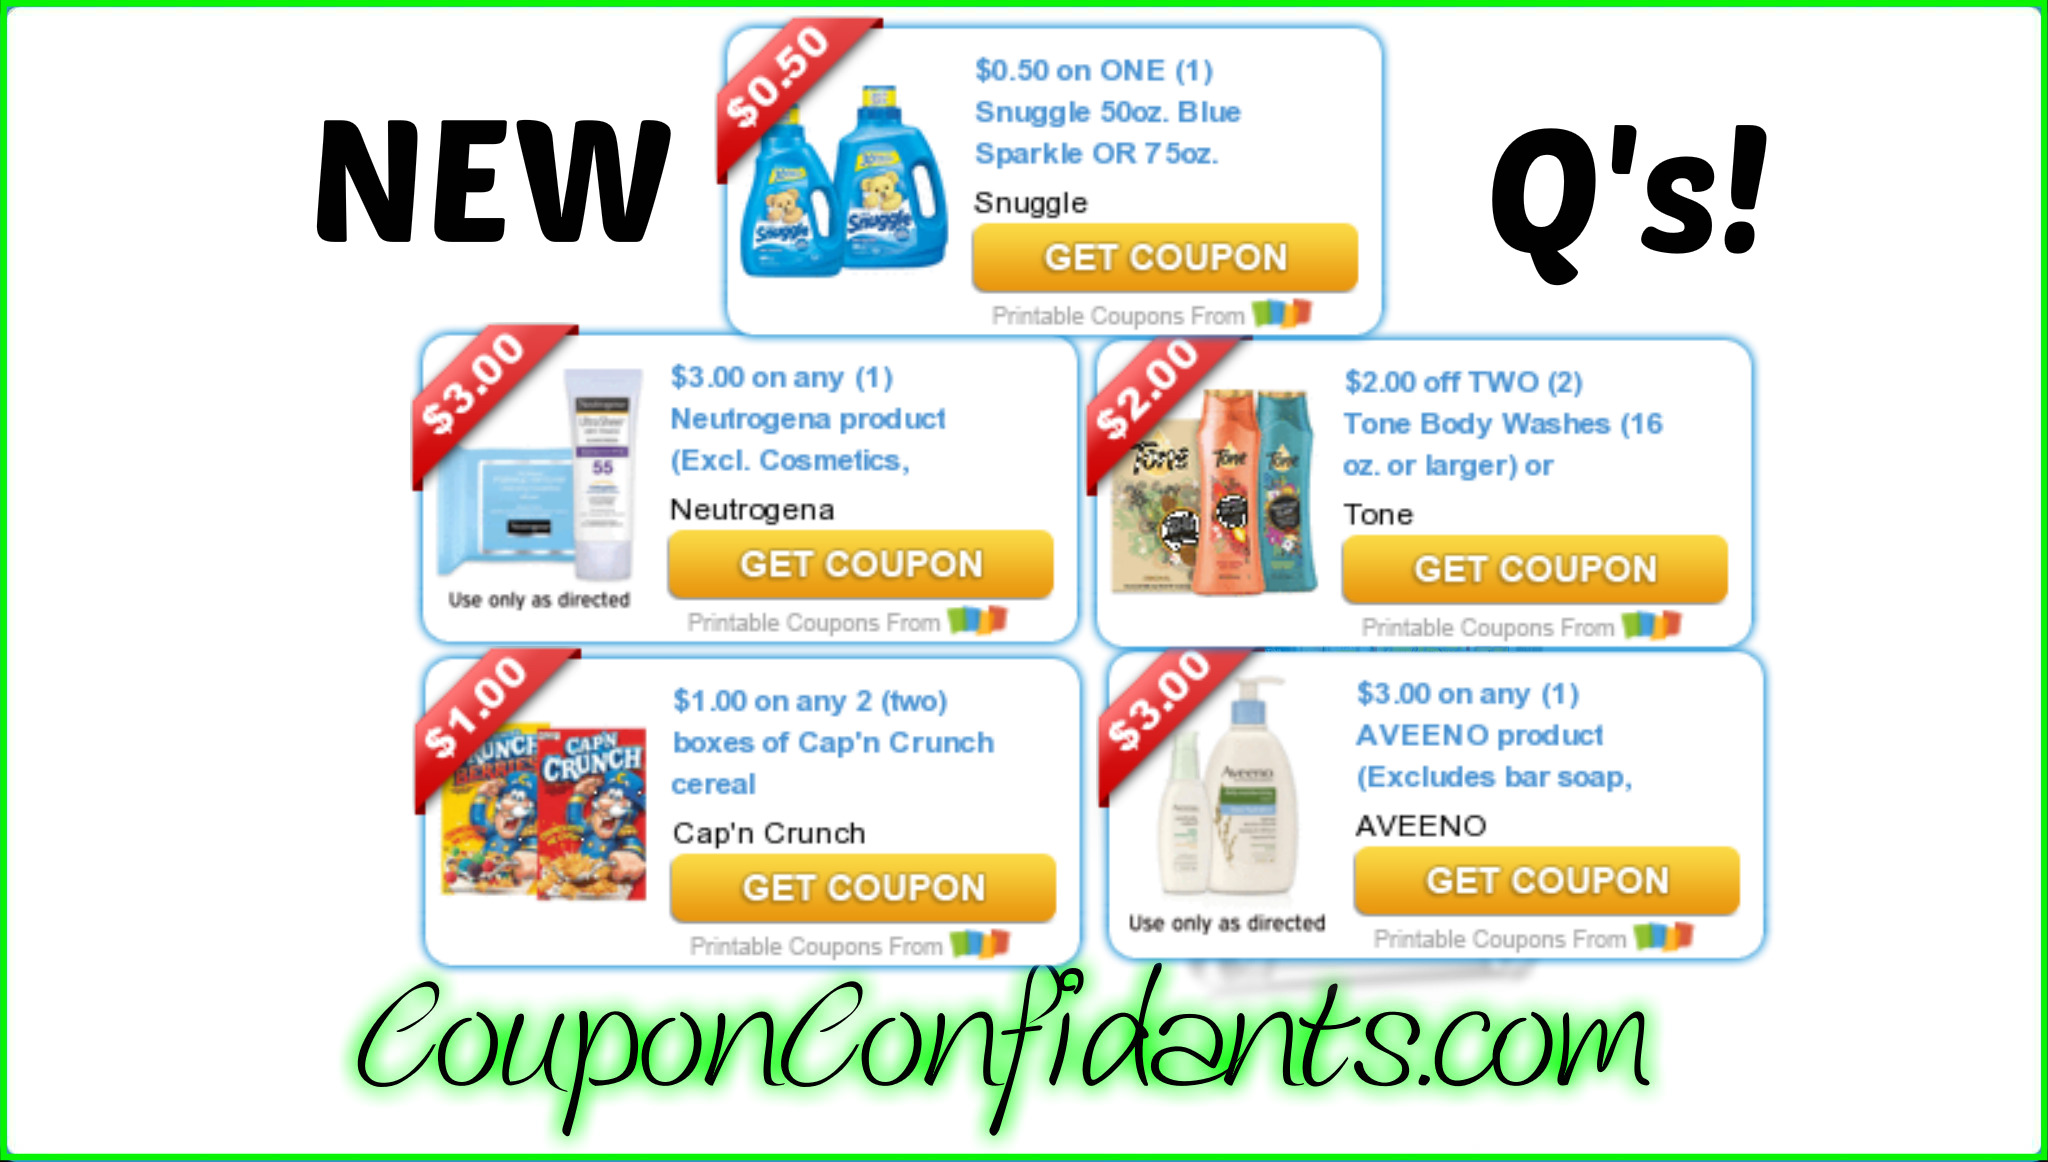 NEW Coupons To Print YES Coupon Confidants